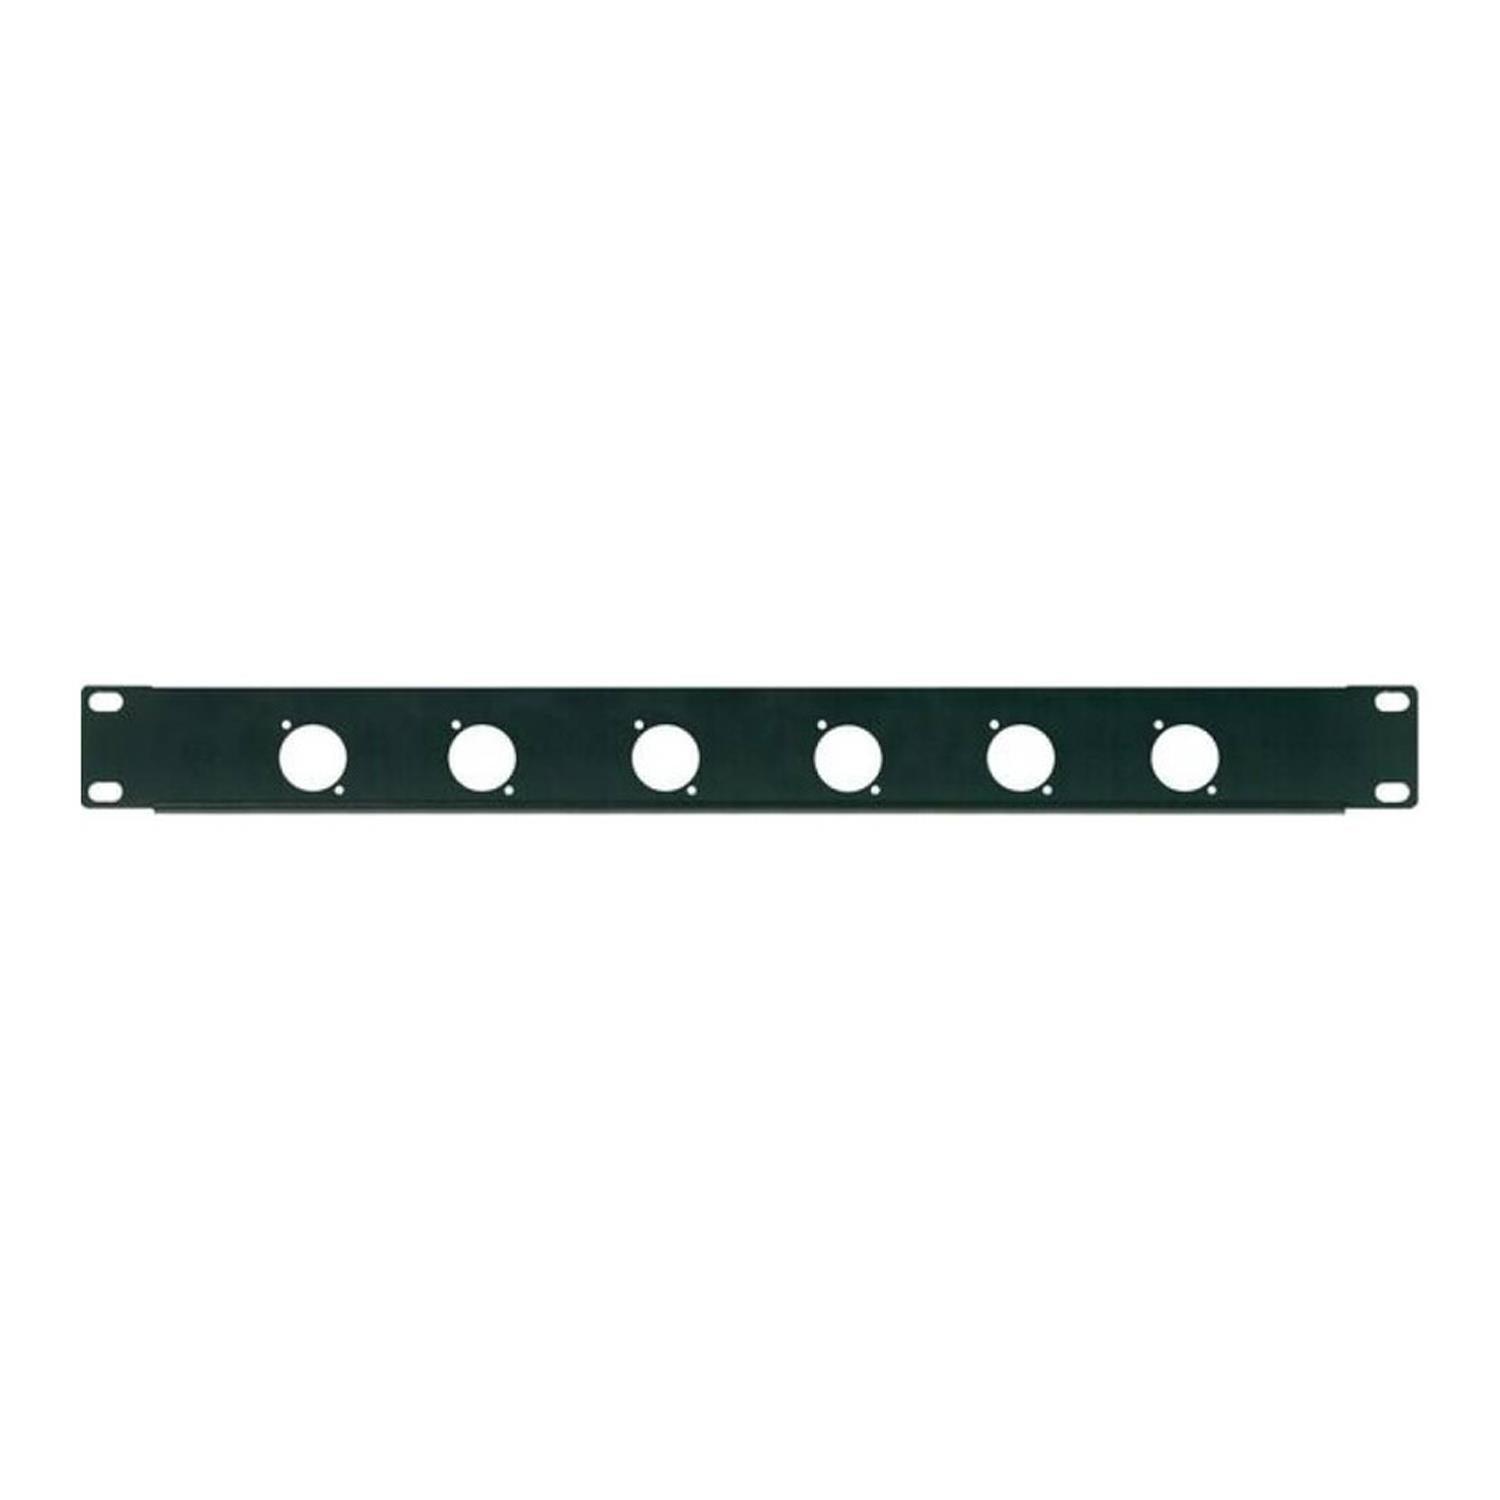 Stagecore 19' 1U 6 Hole Punched Connector Patch Panel for D Series Connectors - DY Pro Audio